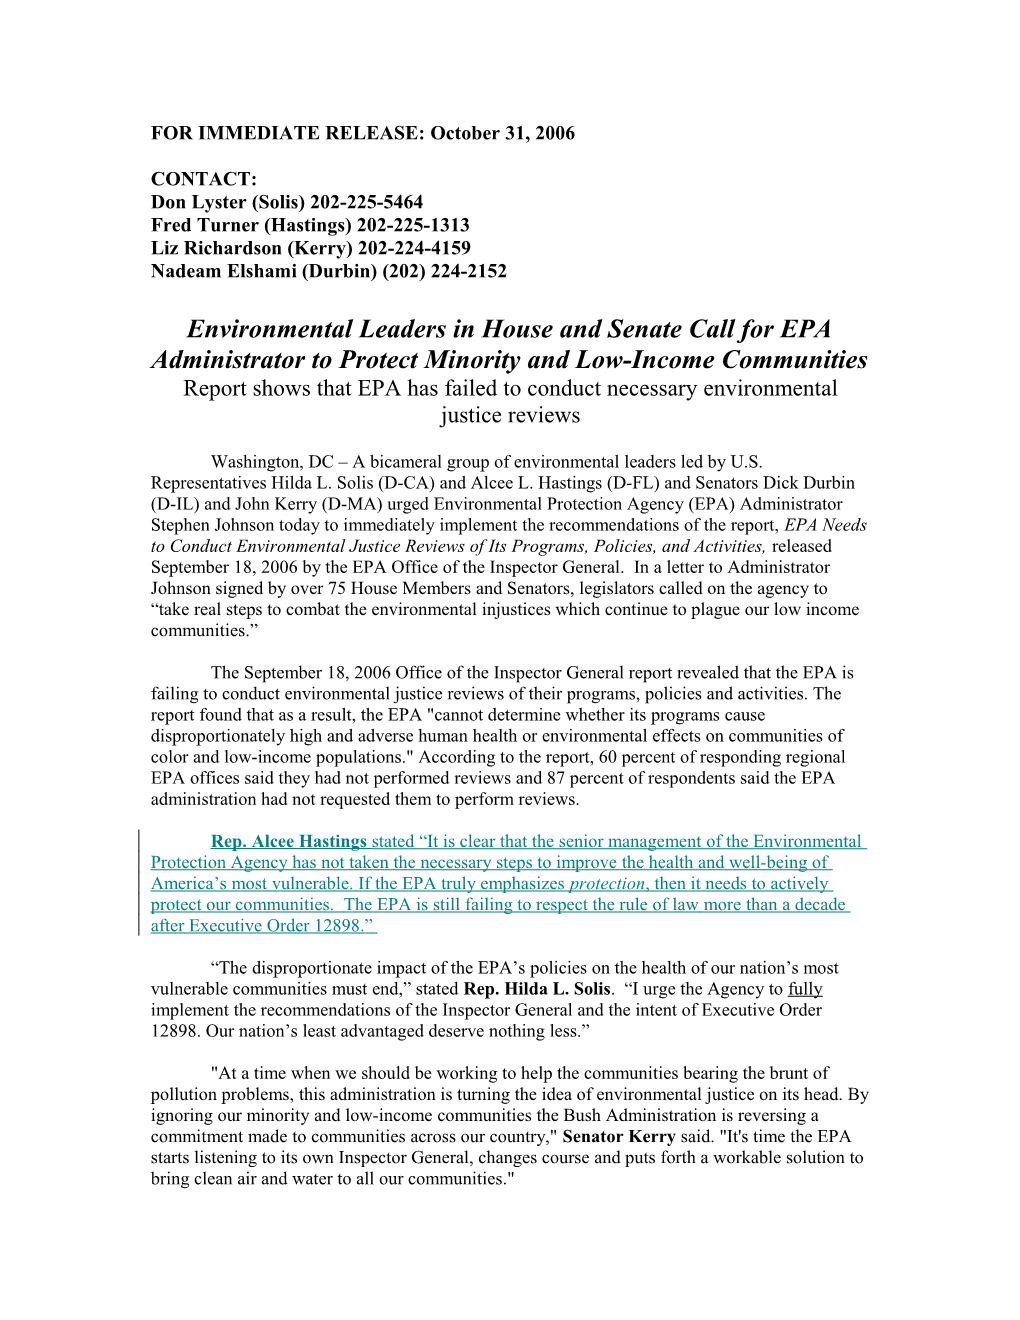 Environmental Leaders in House and Senate Call for Major Changes in Administration's